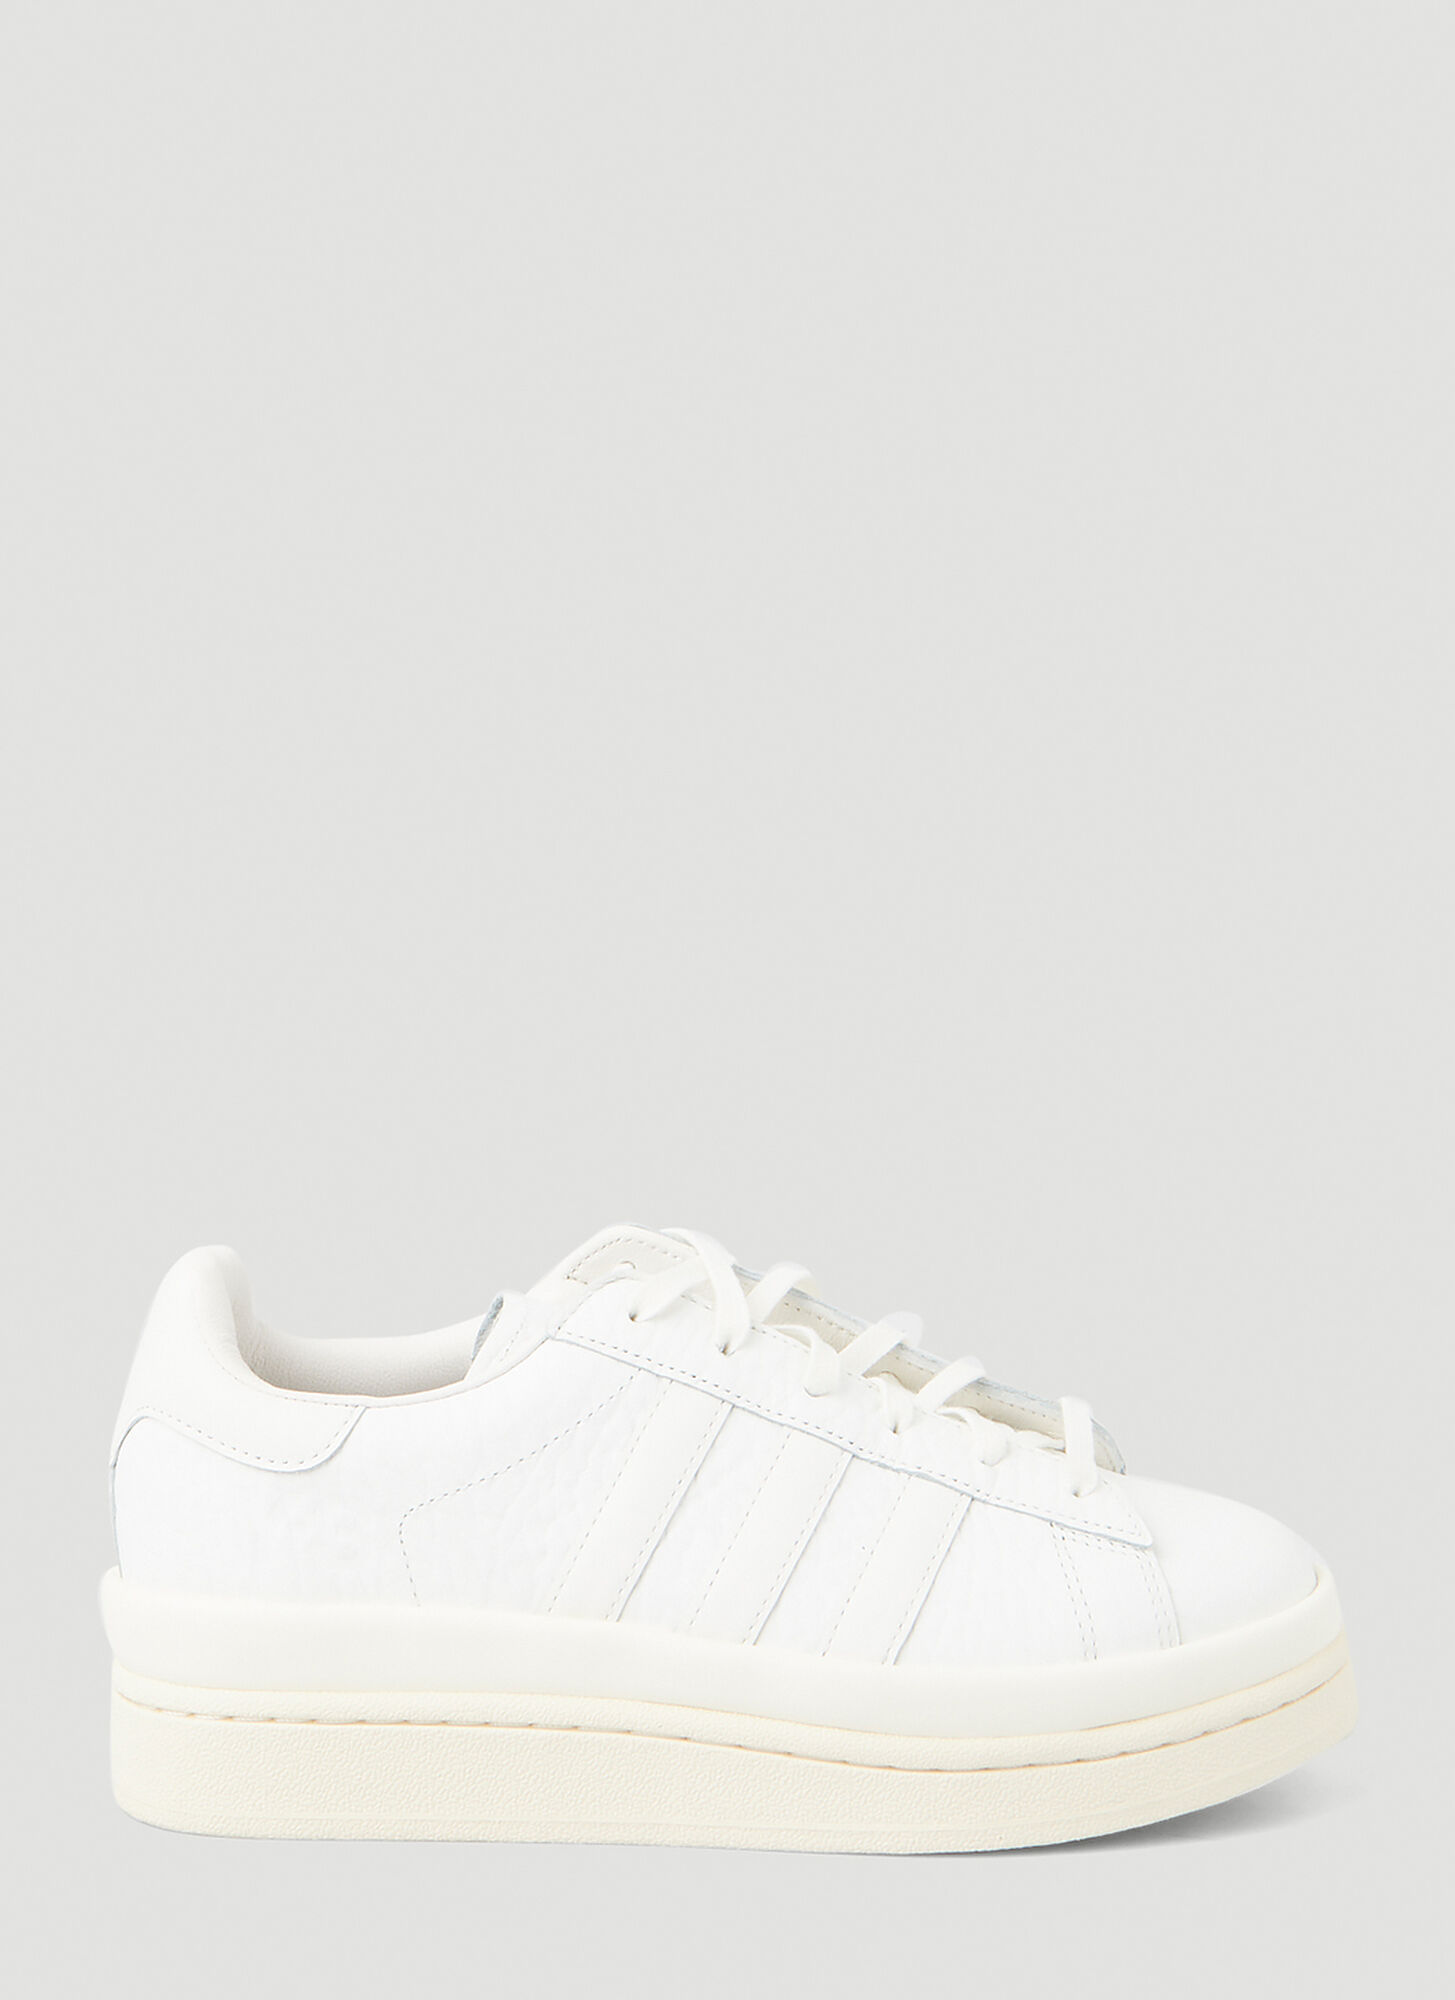 Y-3 Hicho Tra In White